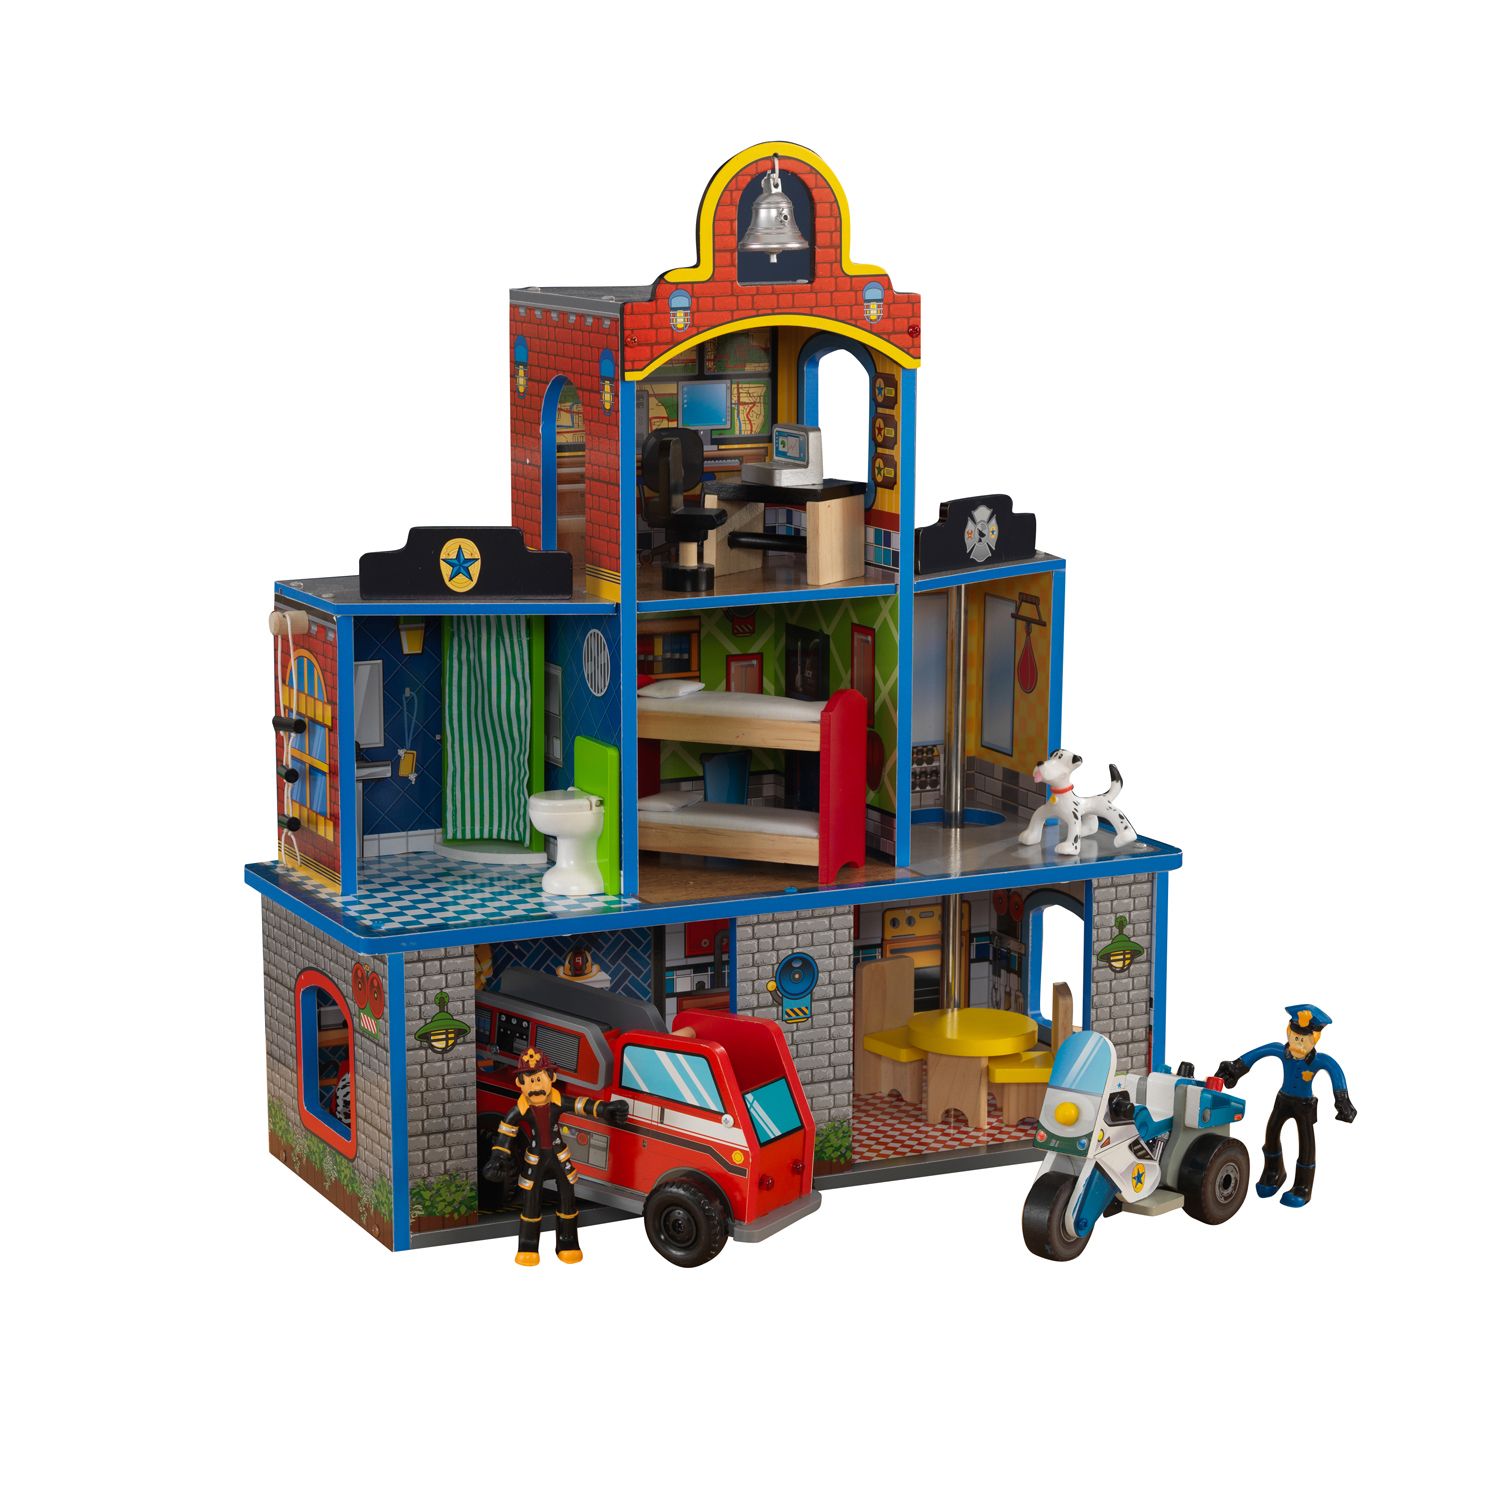 toy fire station & police station playset